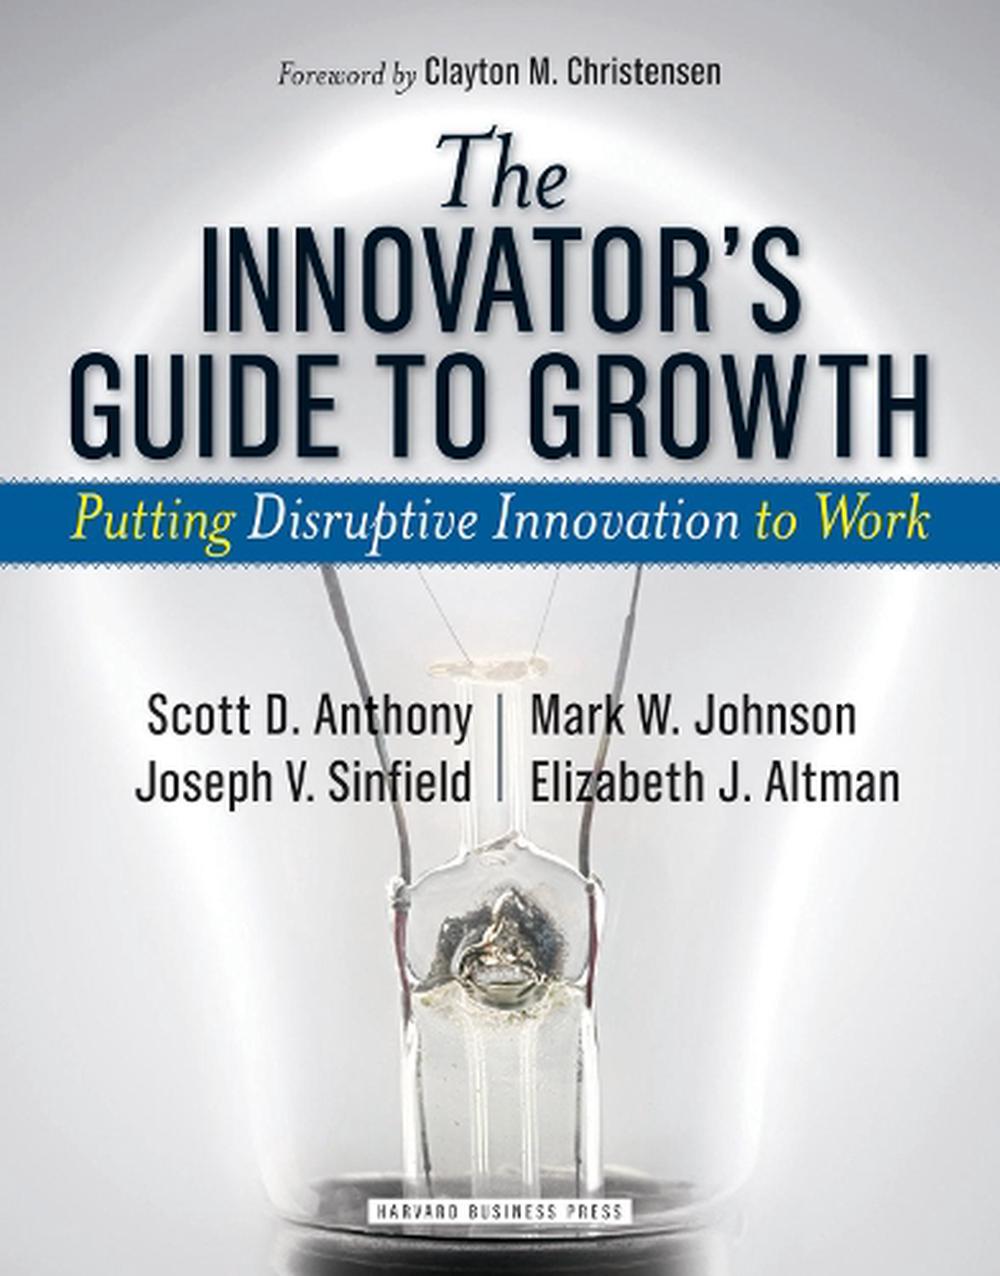 Innovator's Guide to Growth Putting Disruptive Innovation to Work by